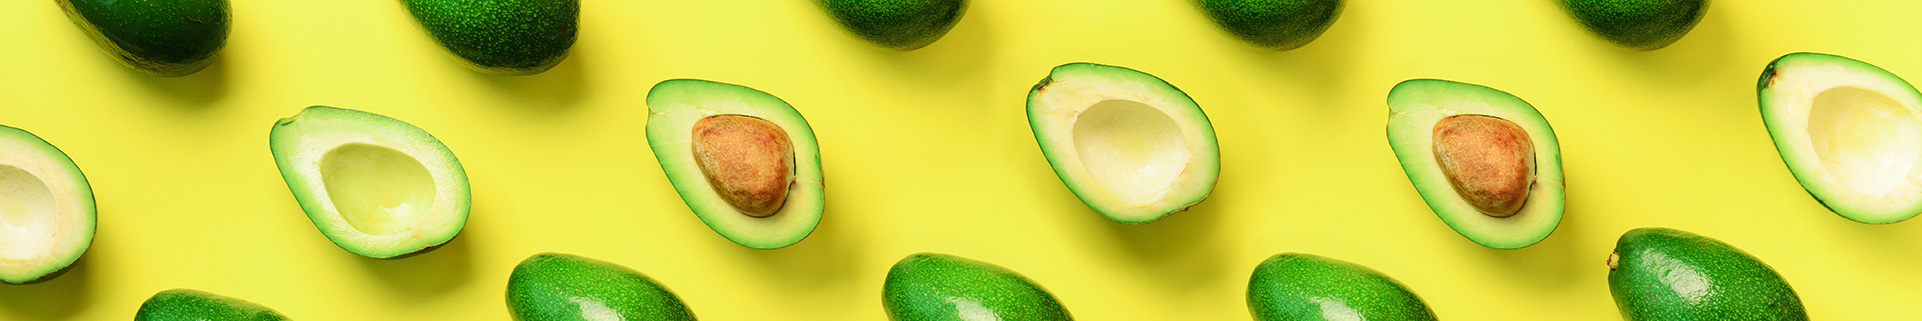 Avocados against a yellow background